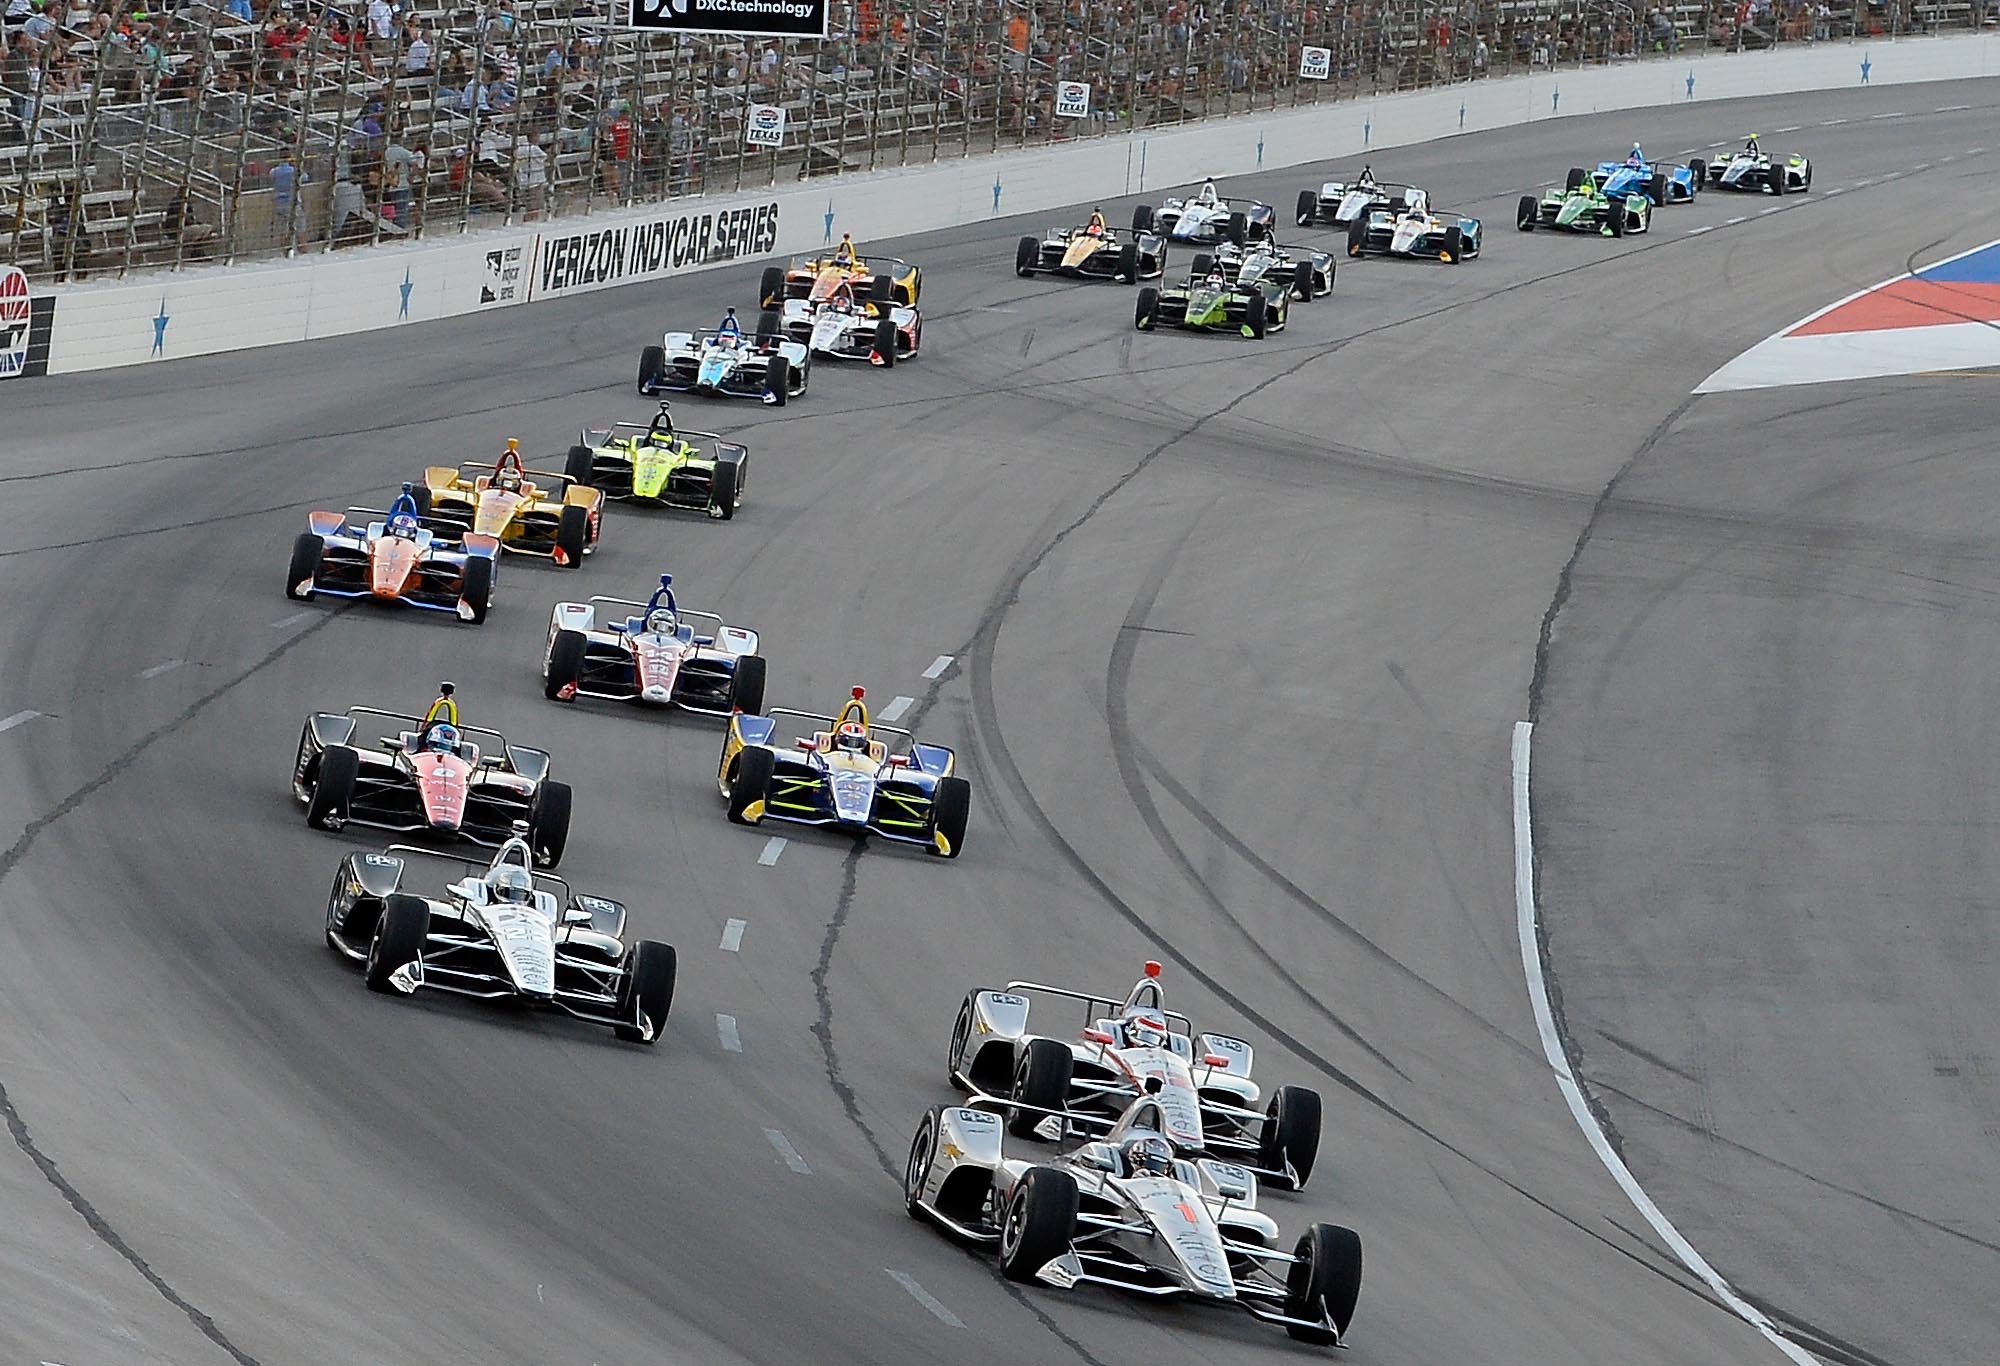 Josef Newgarden, driver of the #1 Verizon Team Penske Chevrolet, leads a pack of cars at Texas Motor Speedway